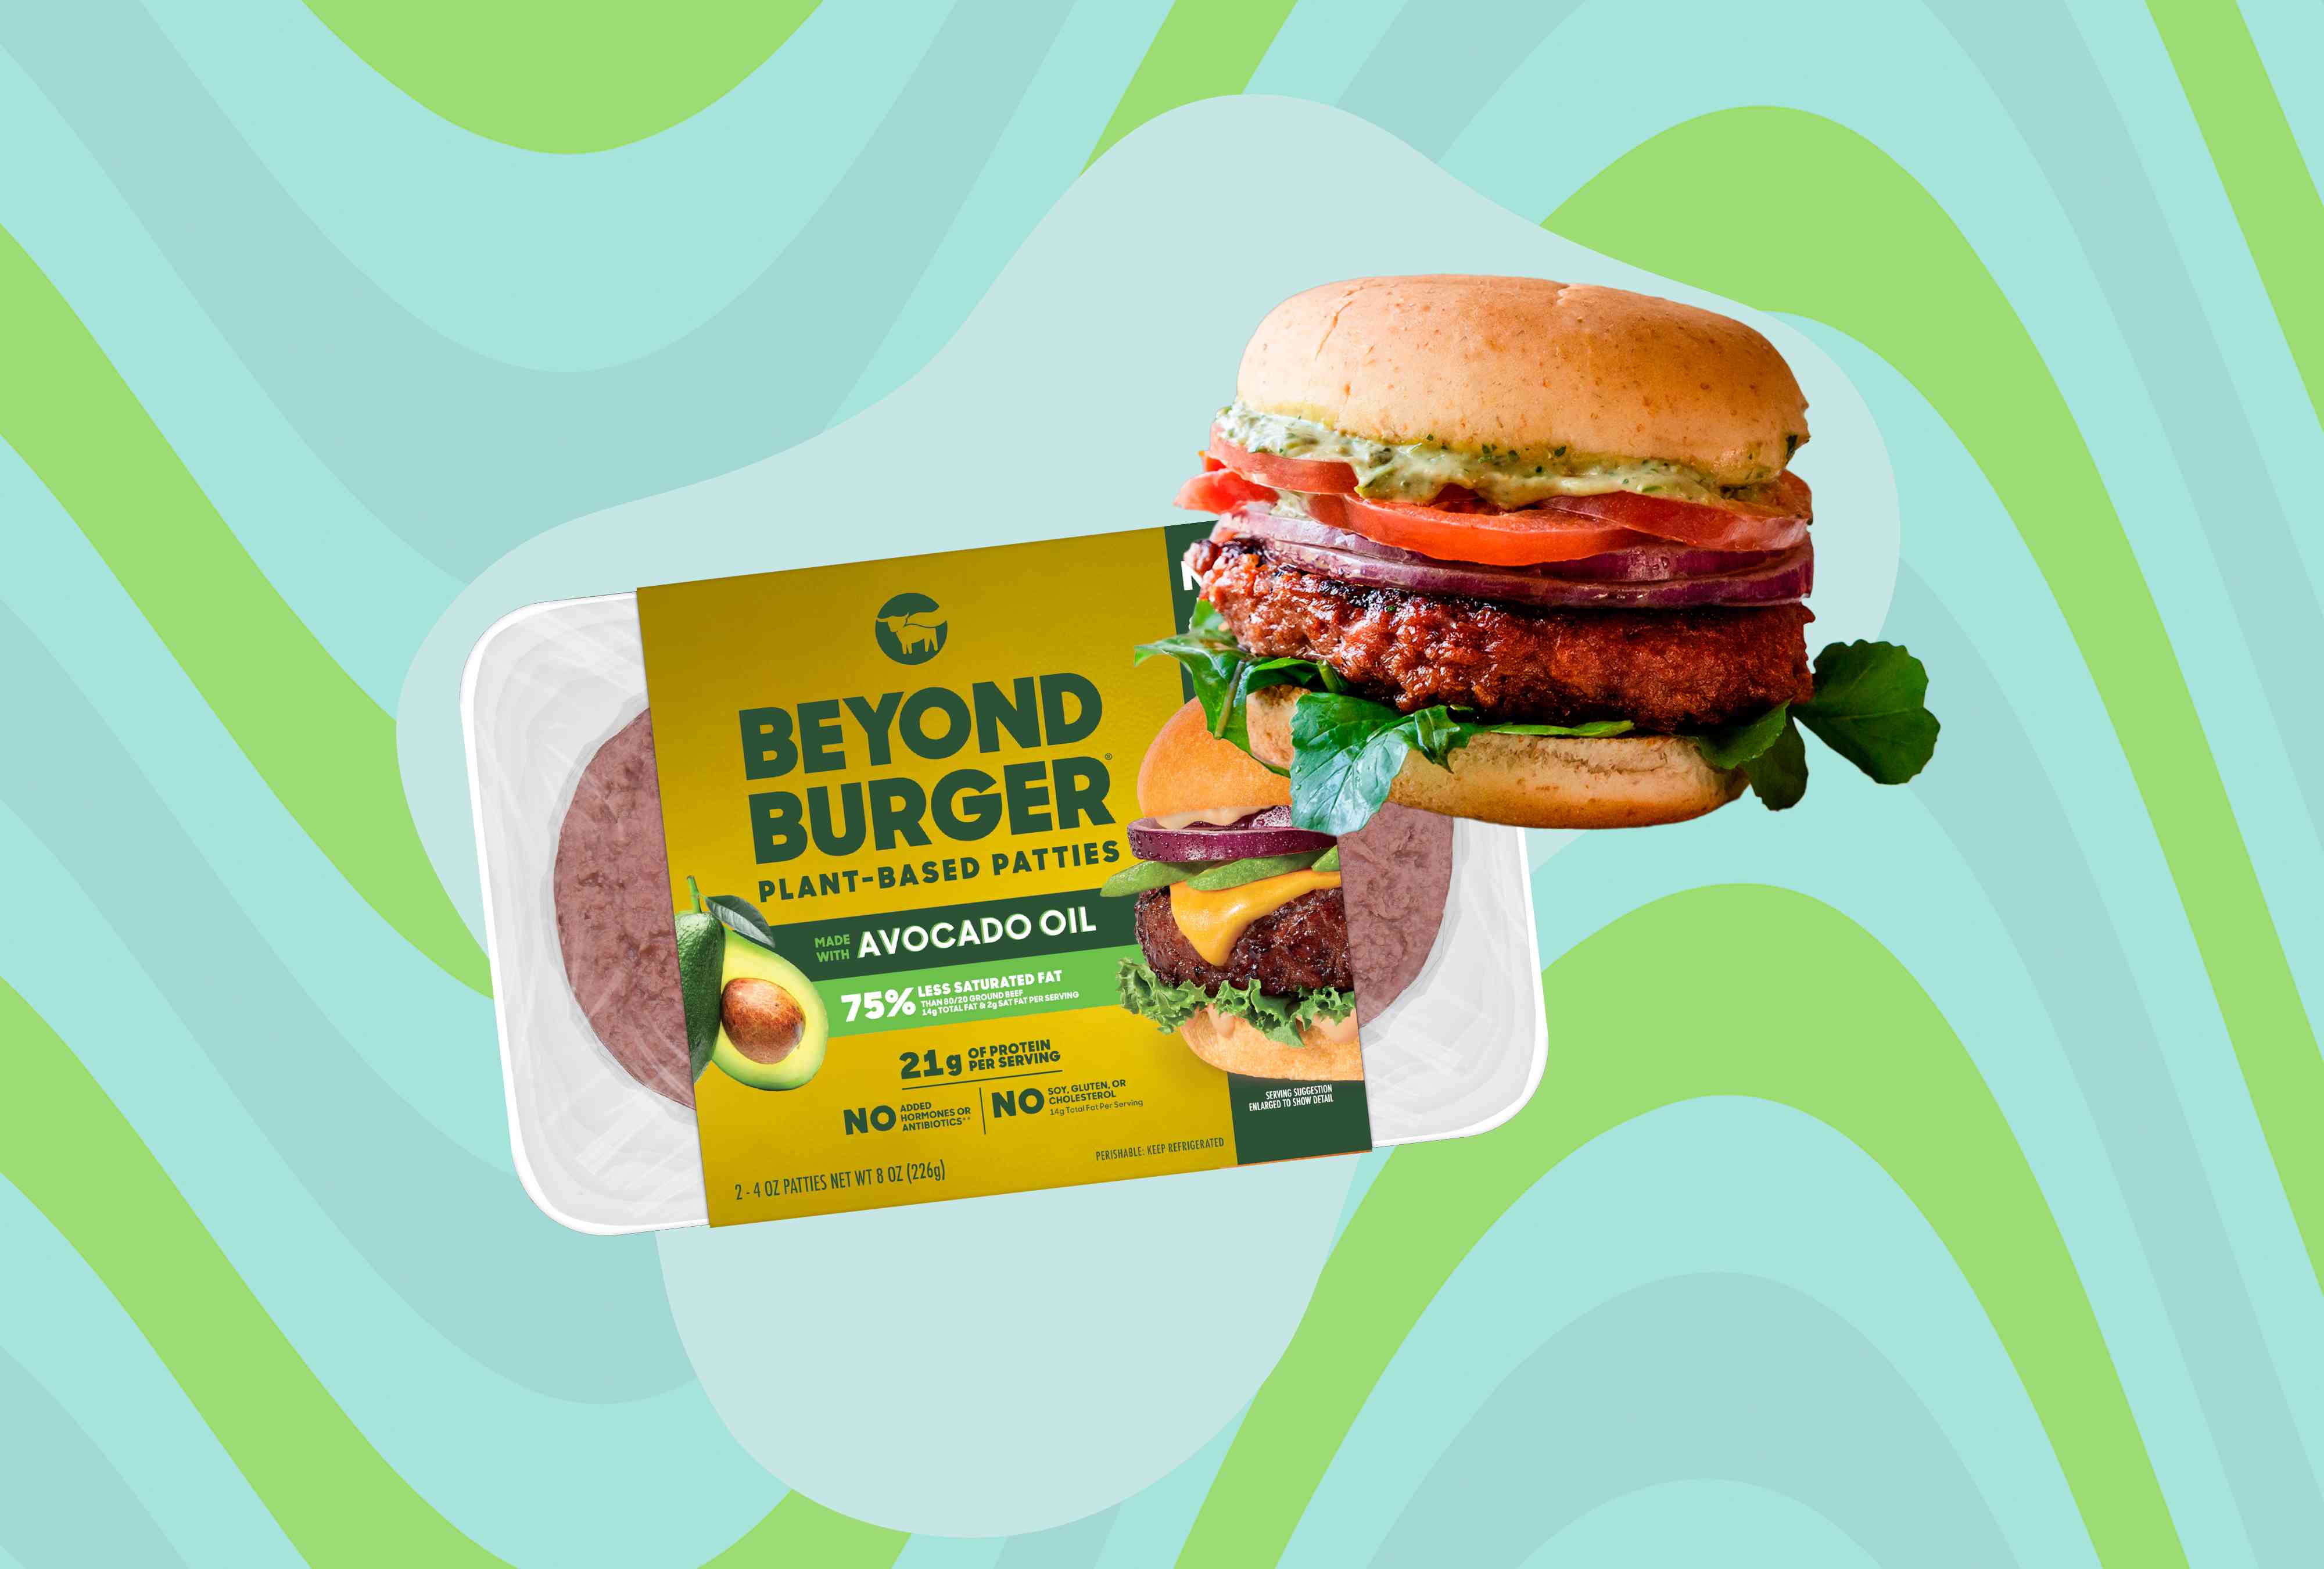 beyond meat just revamped some of their products, but are they healthier? here's what a dietitian thinks